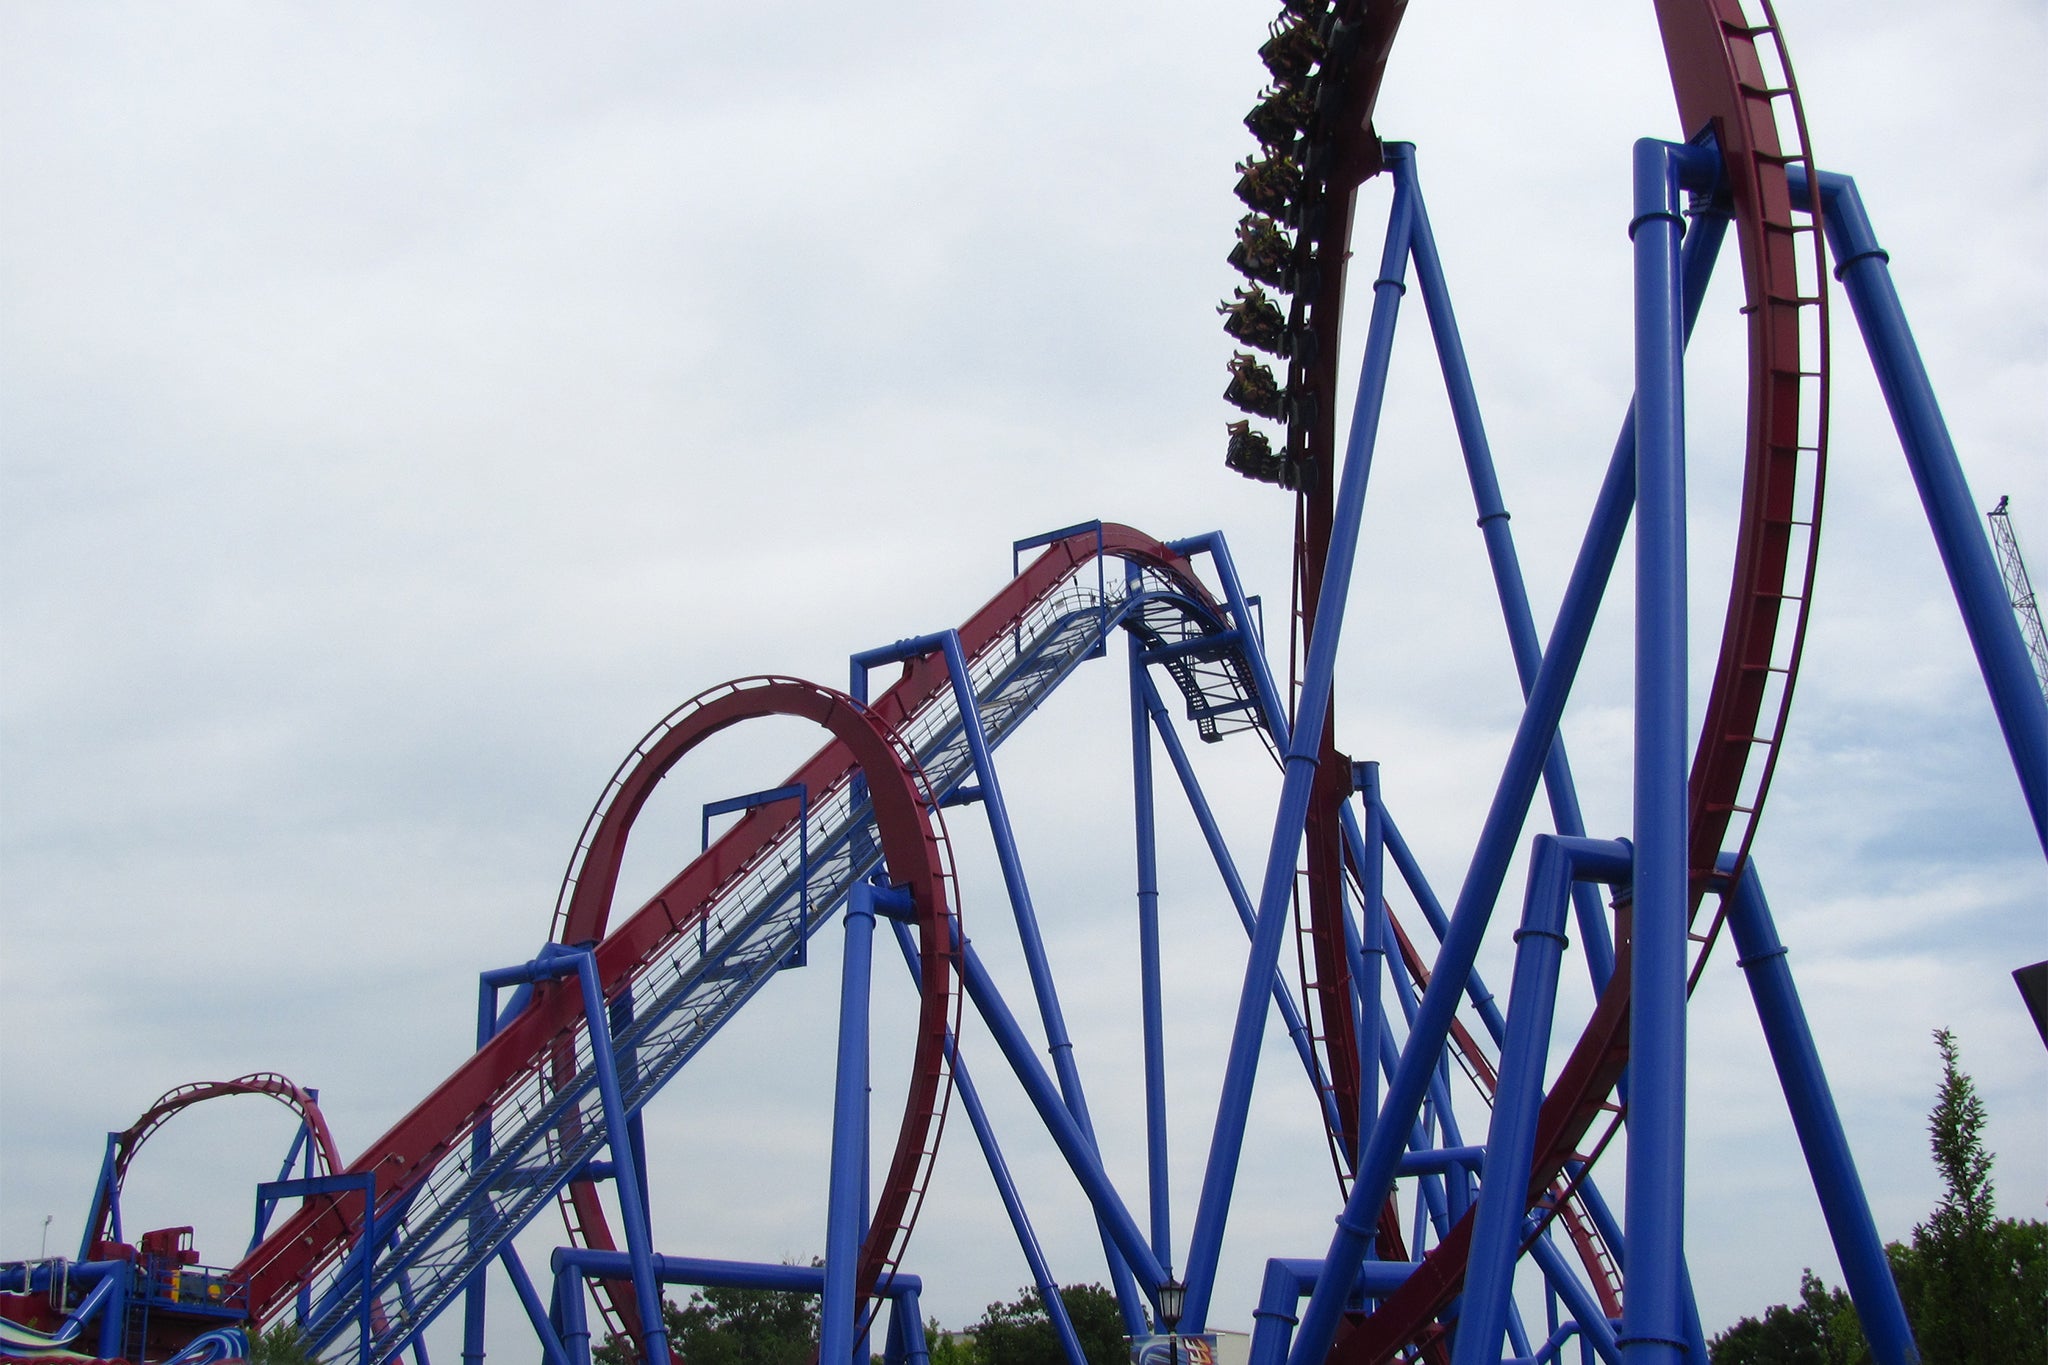 A man has been taken to the hospital after police say they suspect he was struck by the Banshee roller coaster at Kings Island in Ohio